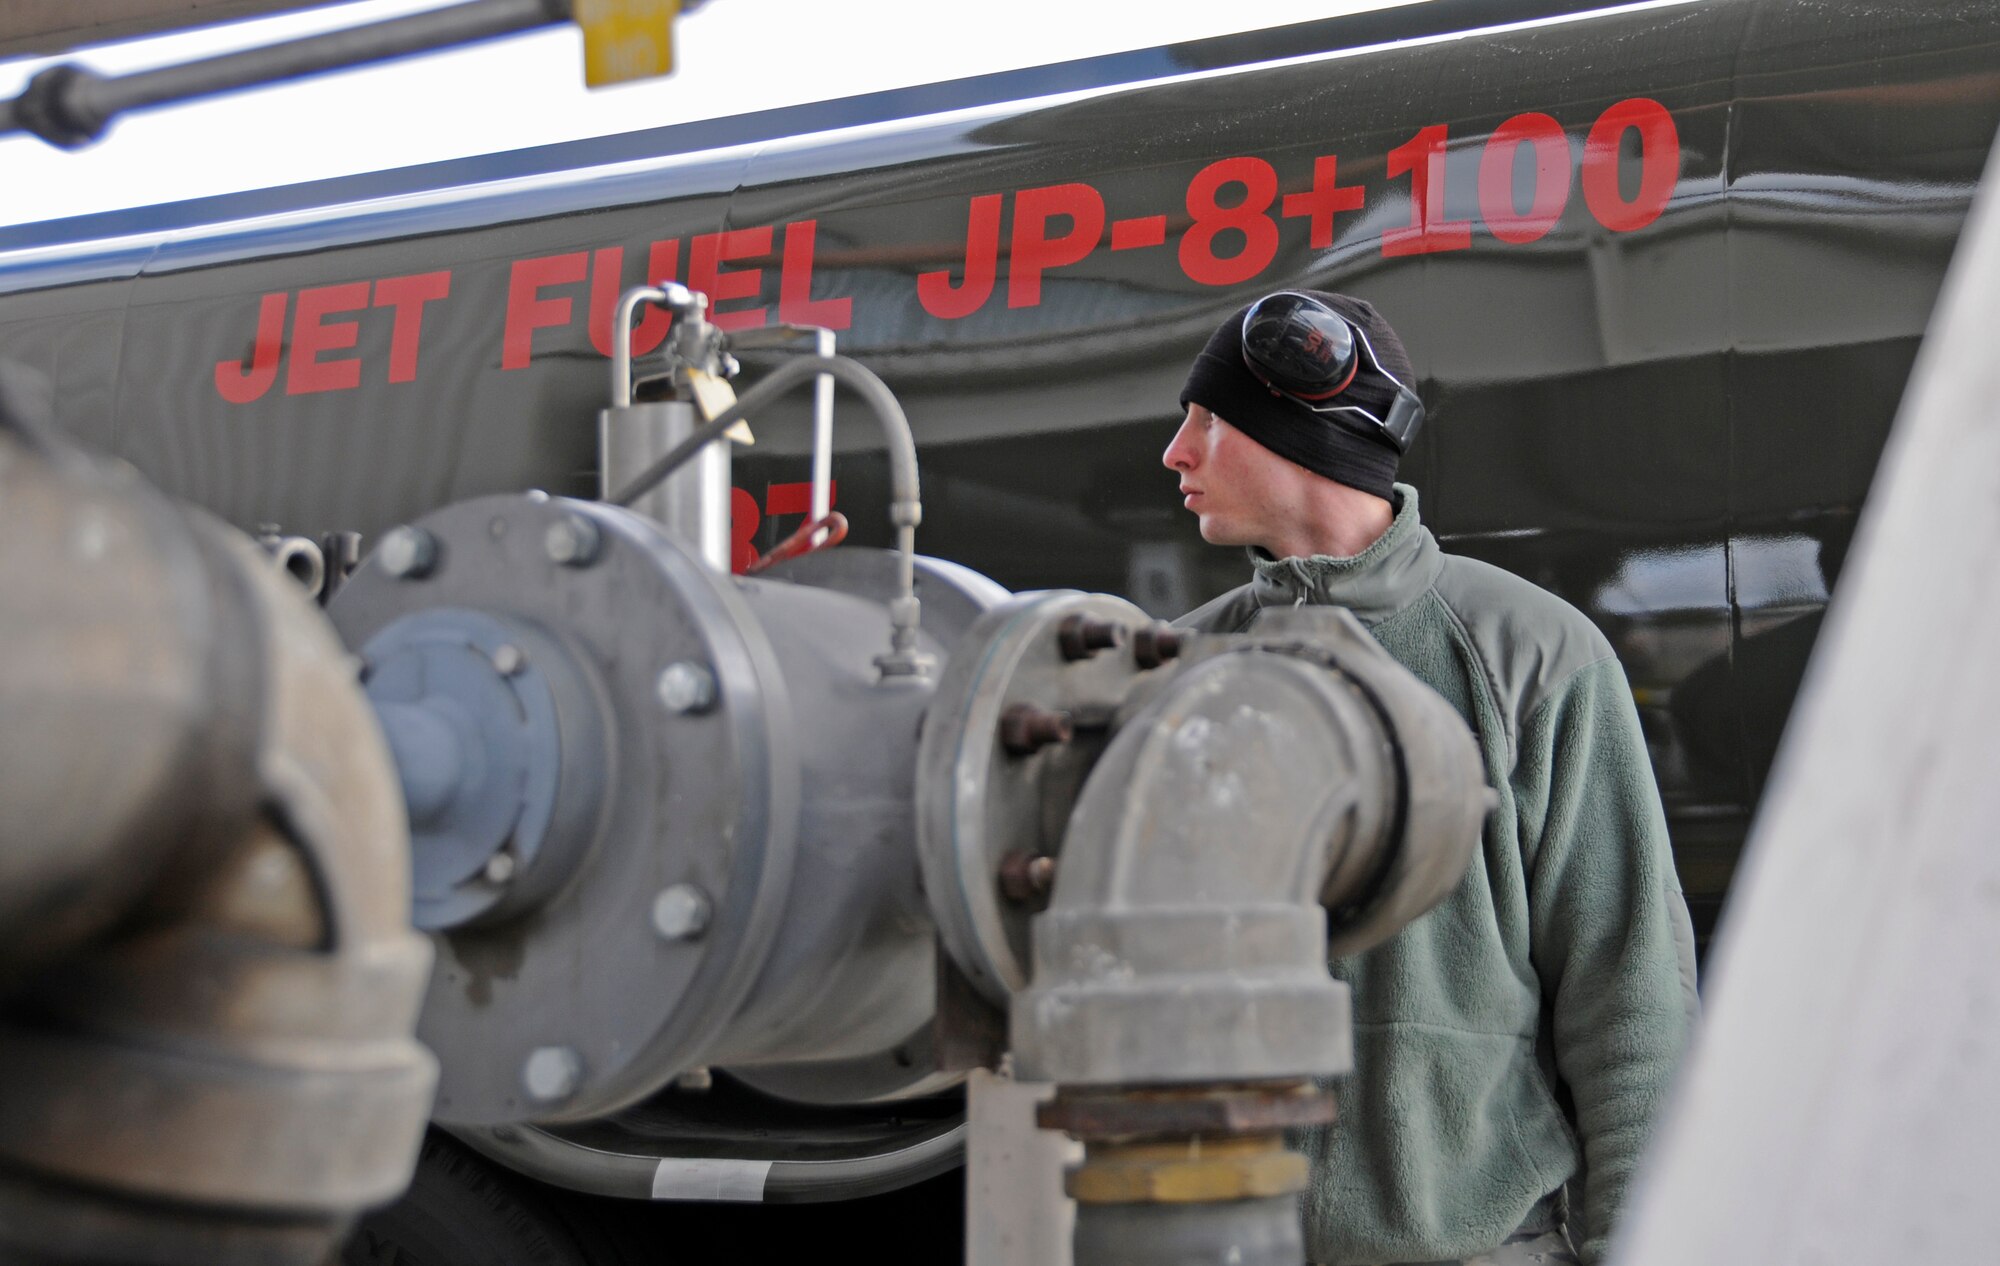 Staff Sgt. Colin Carr pumps about 1,500 gallons of jet fuel to one of a fleet of fuel trucks before taking it to the flightline to refuel jets returning from missions flown in the morning.